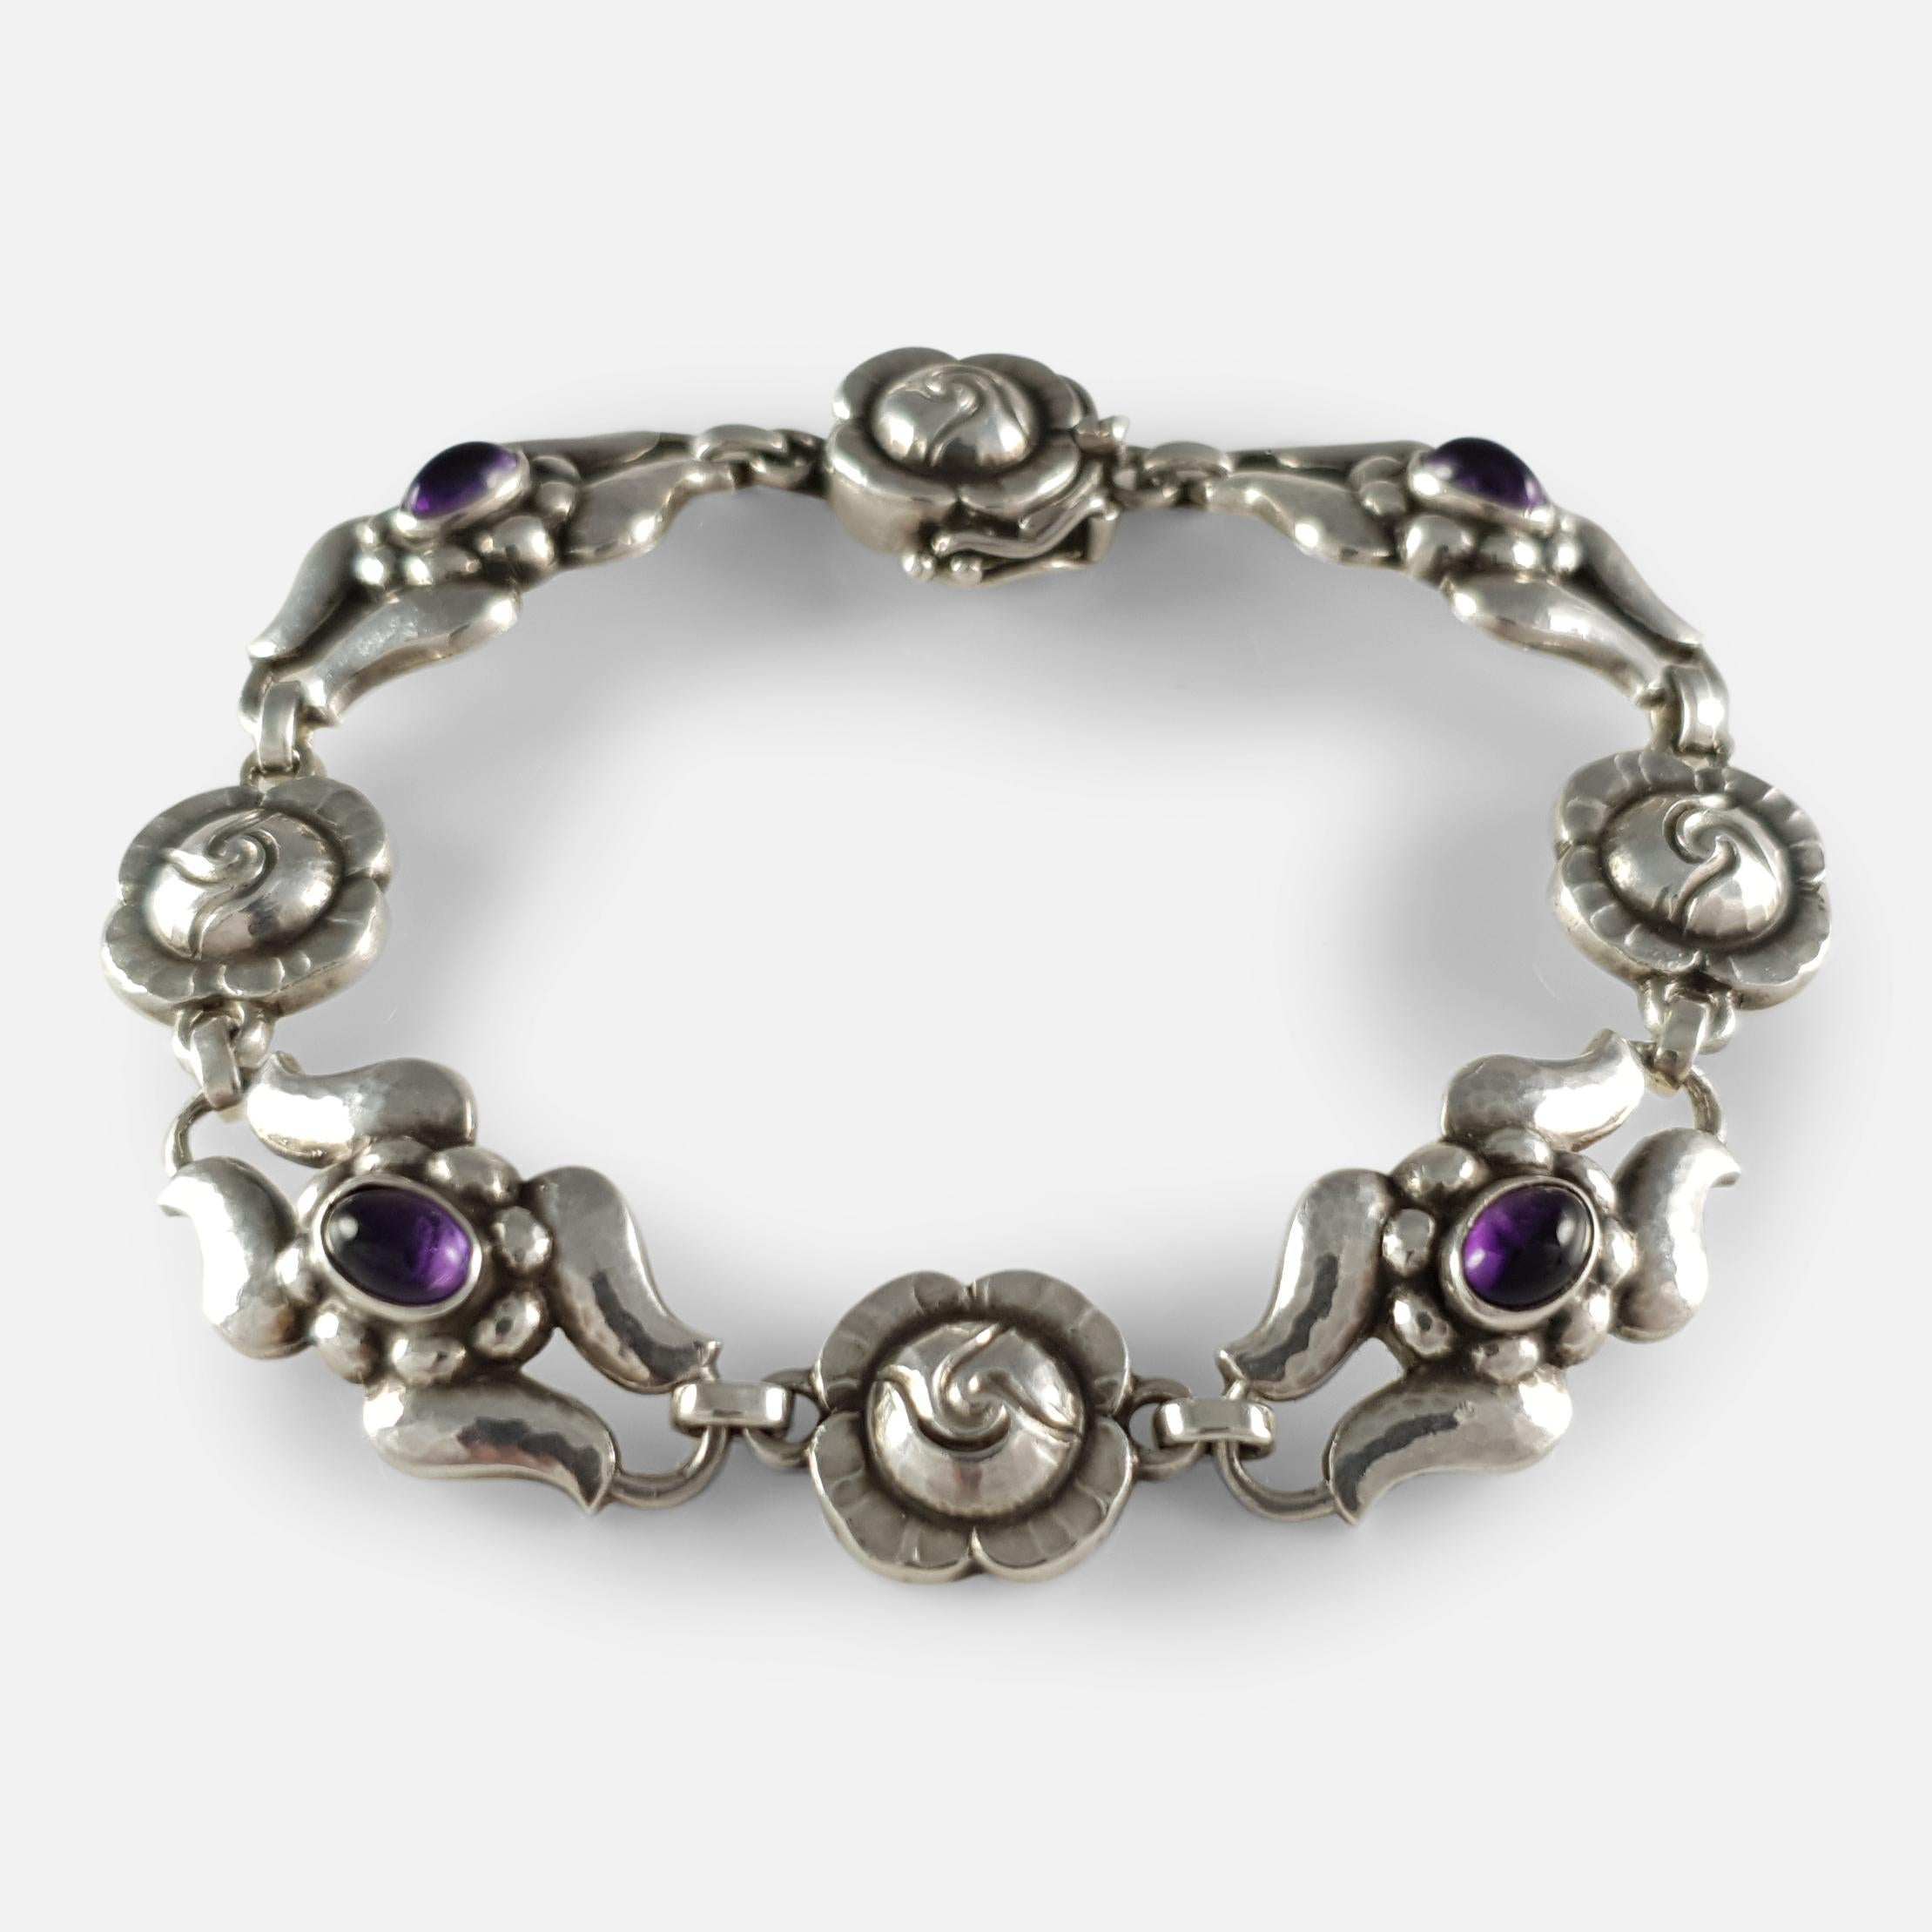 A silver amethyst bracelet, #18, by Georg Jensen, circa 1933-1944. The bracelet is designed as alternating flower heads and scrolling links set with amethyst cabochons.

The bracelet is stamped with the 